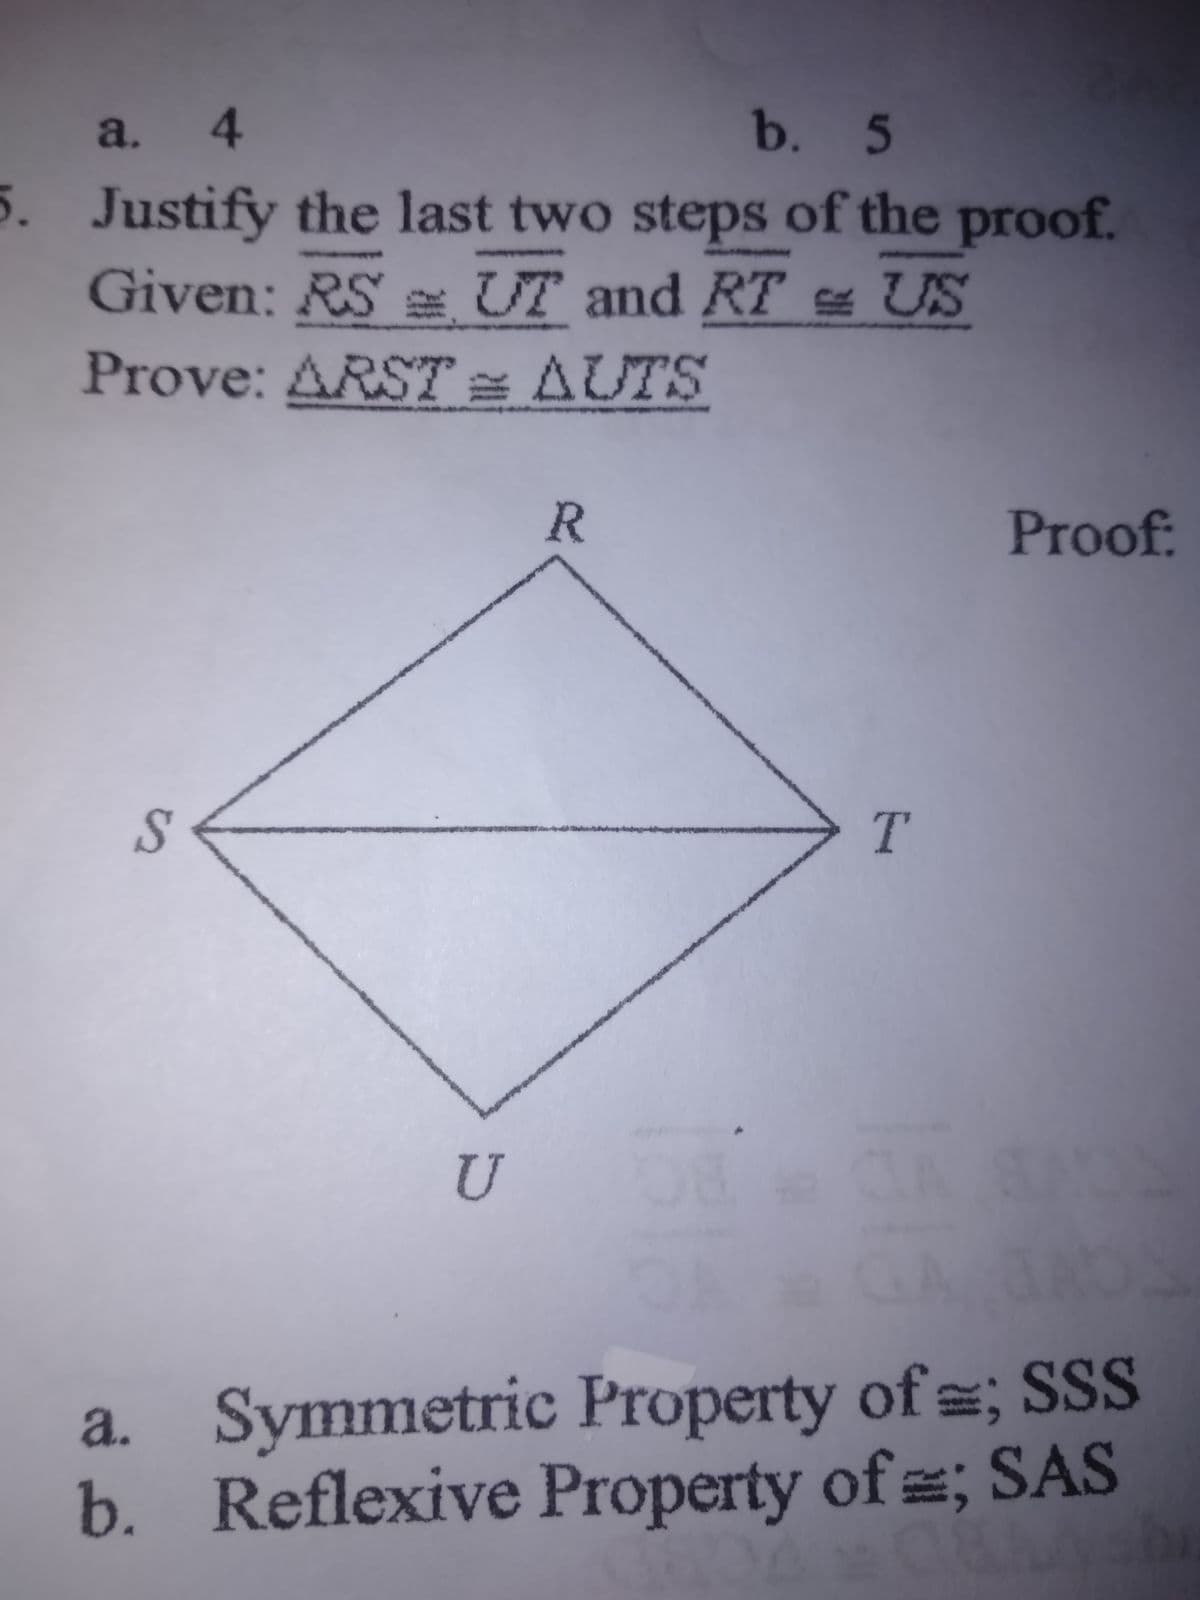 a. 4
b. 5
5. Justify the last two steps of the proof.
Given: RS e UT and RT US
Prove: ARST = AUTS
R
Proof
T.
U
a. Symmetric Property of ; SSS
b. Reflexive Property of ; SAS
%24
